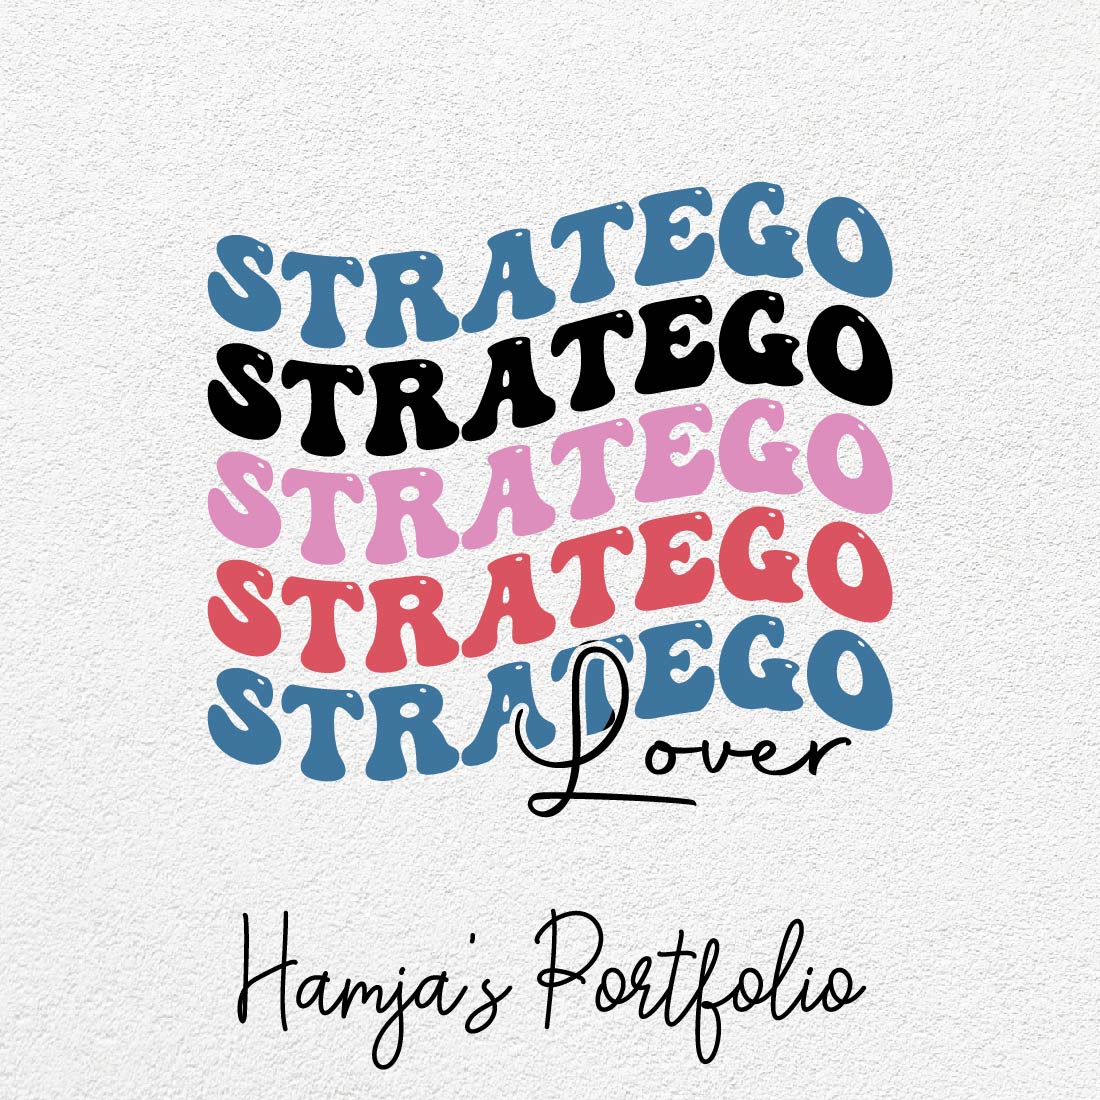 Stratego Lover Vector Svg cover image.